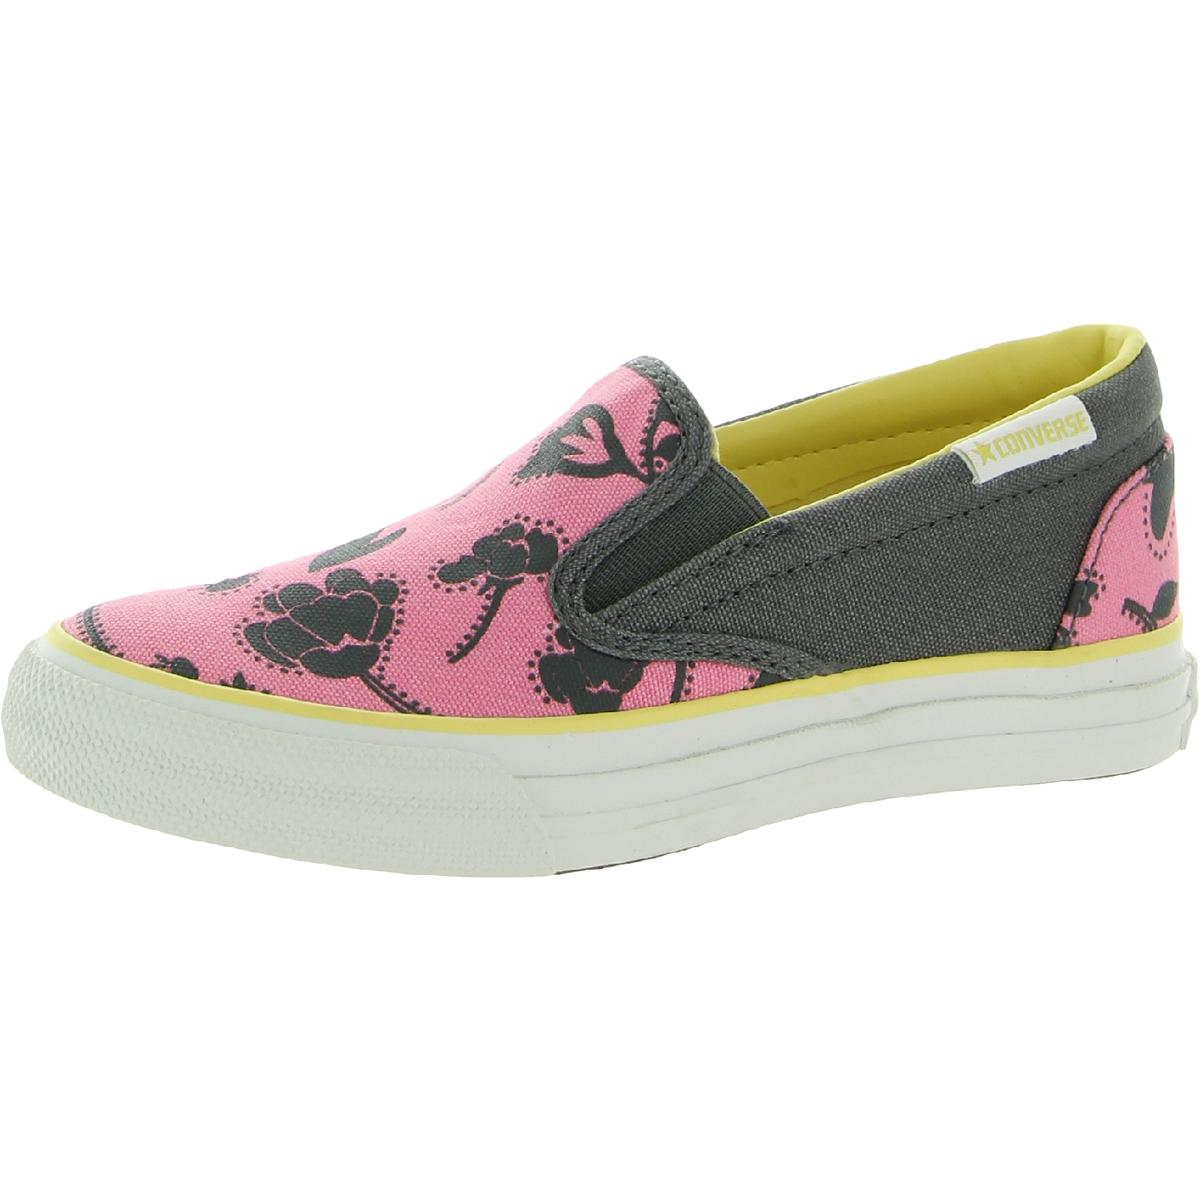 Converse Skidgrip EV Skull Girls Canvas Slip On Casual and Fashion Sneakers